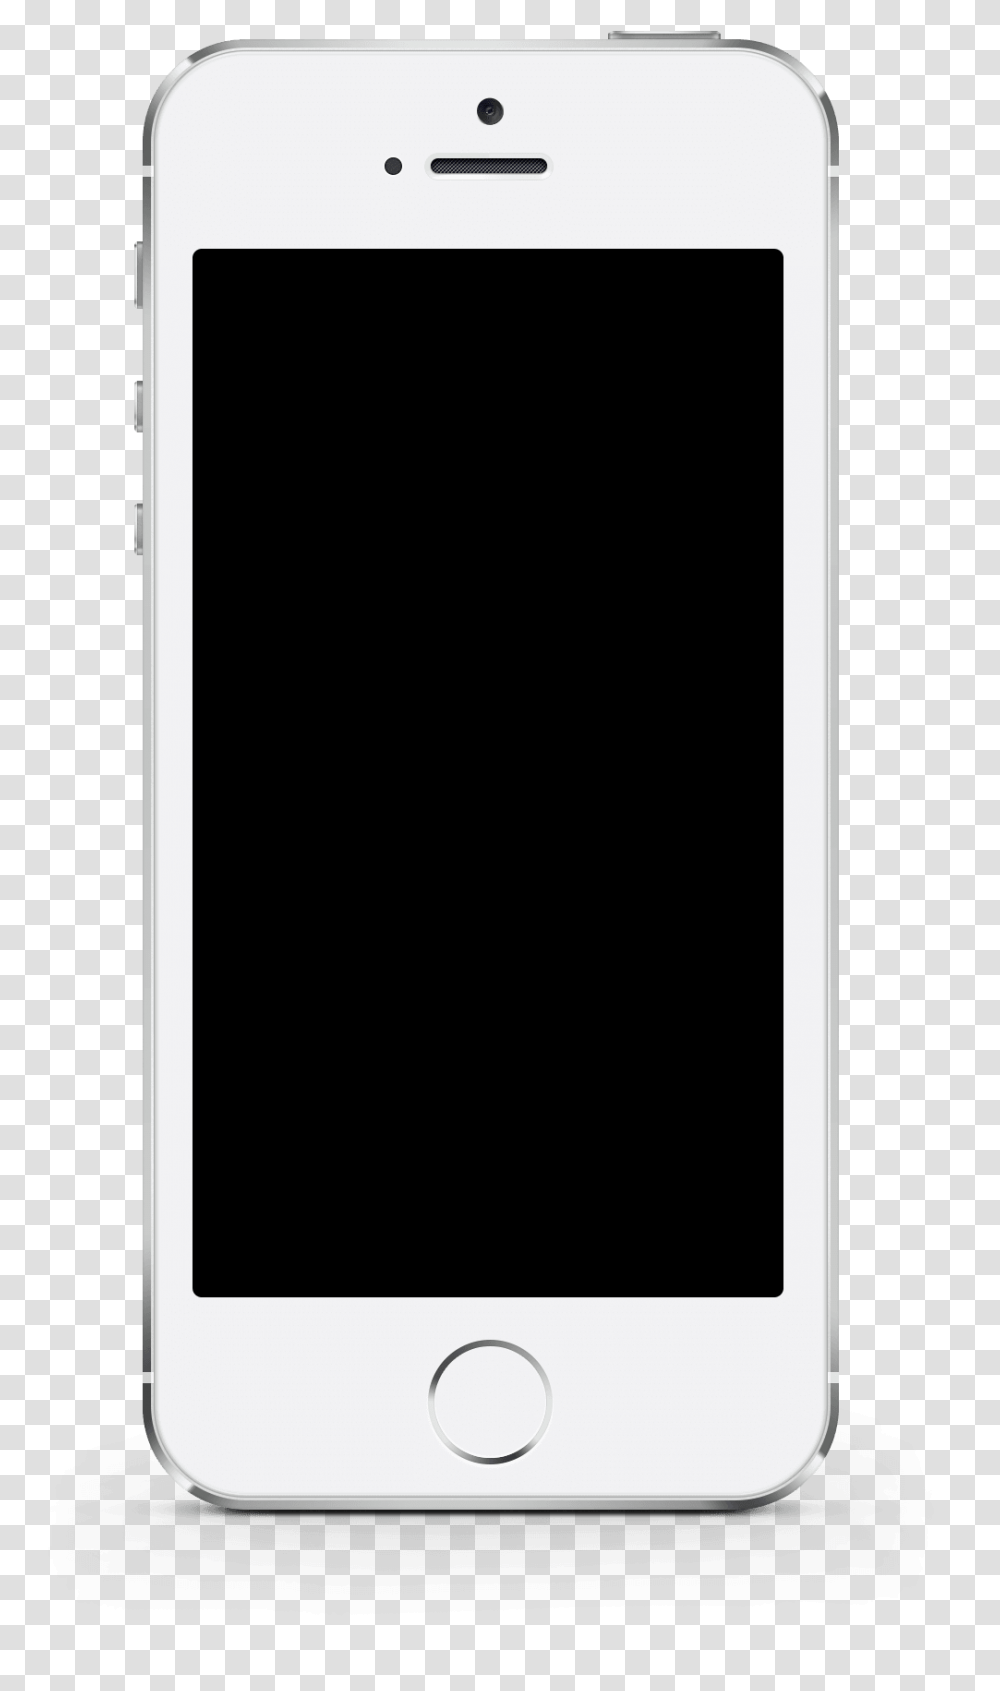 Mobile Free Download Images Classic Background Iphone Overlay, Mobile Phone, Electronics, Cell Phone, Screen Transparent Png